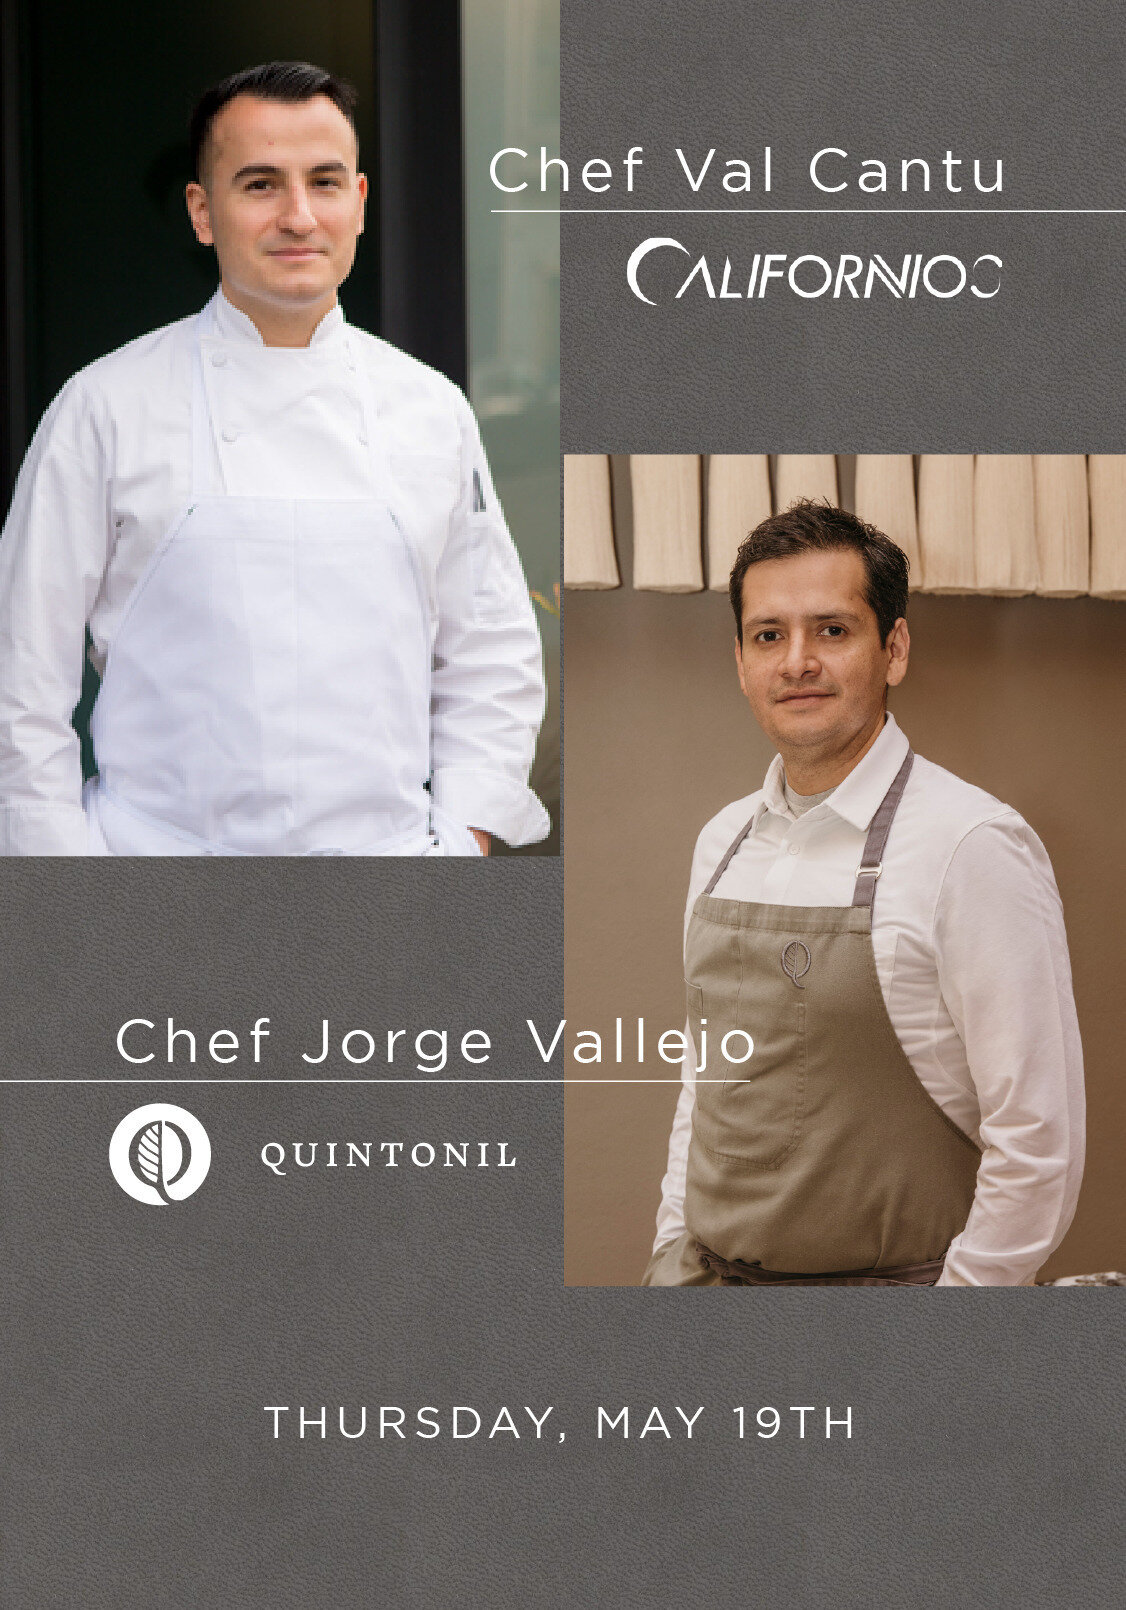 Portrait of Chef Cantu and Chef Vallejo